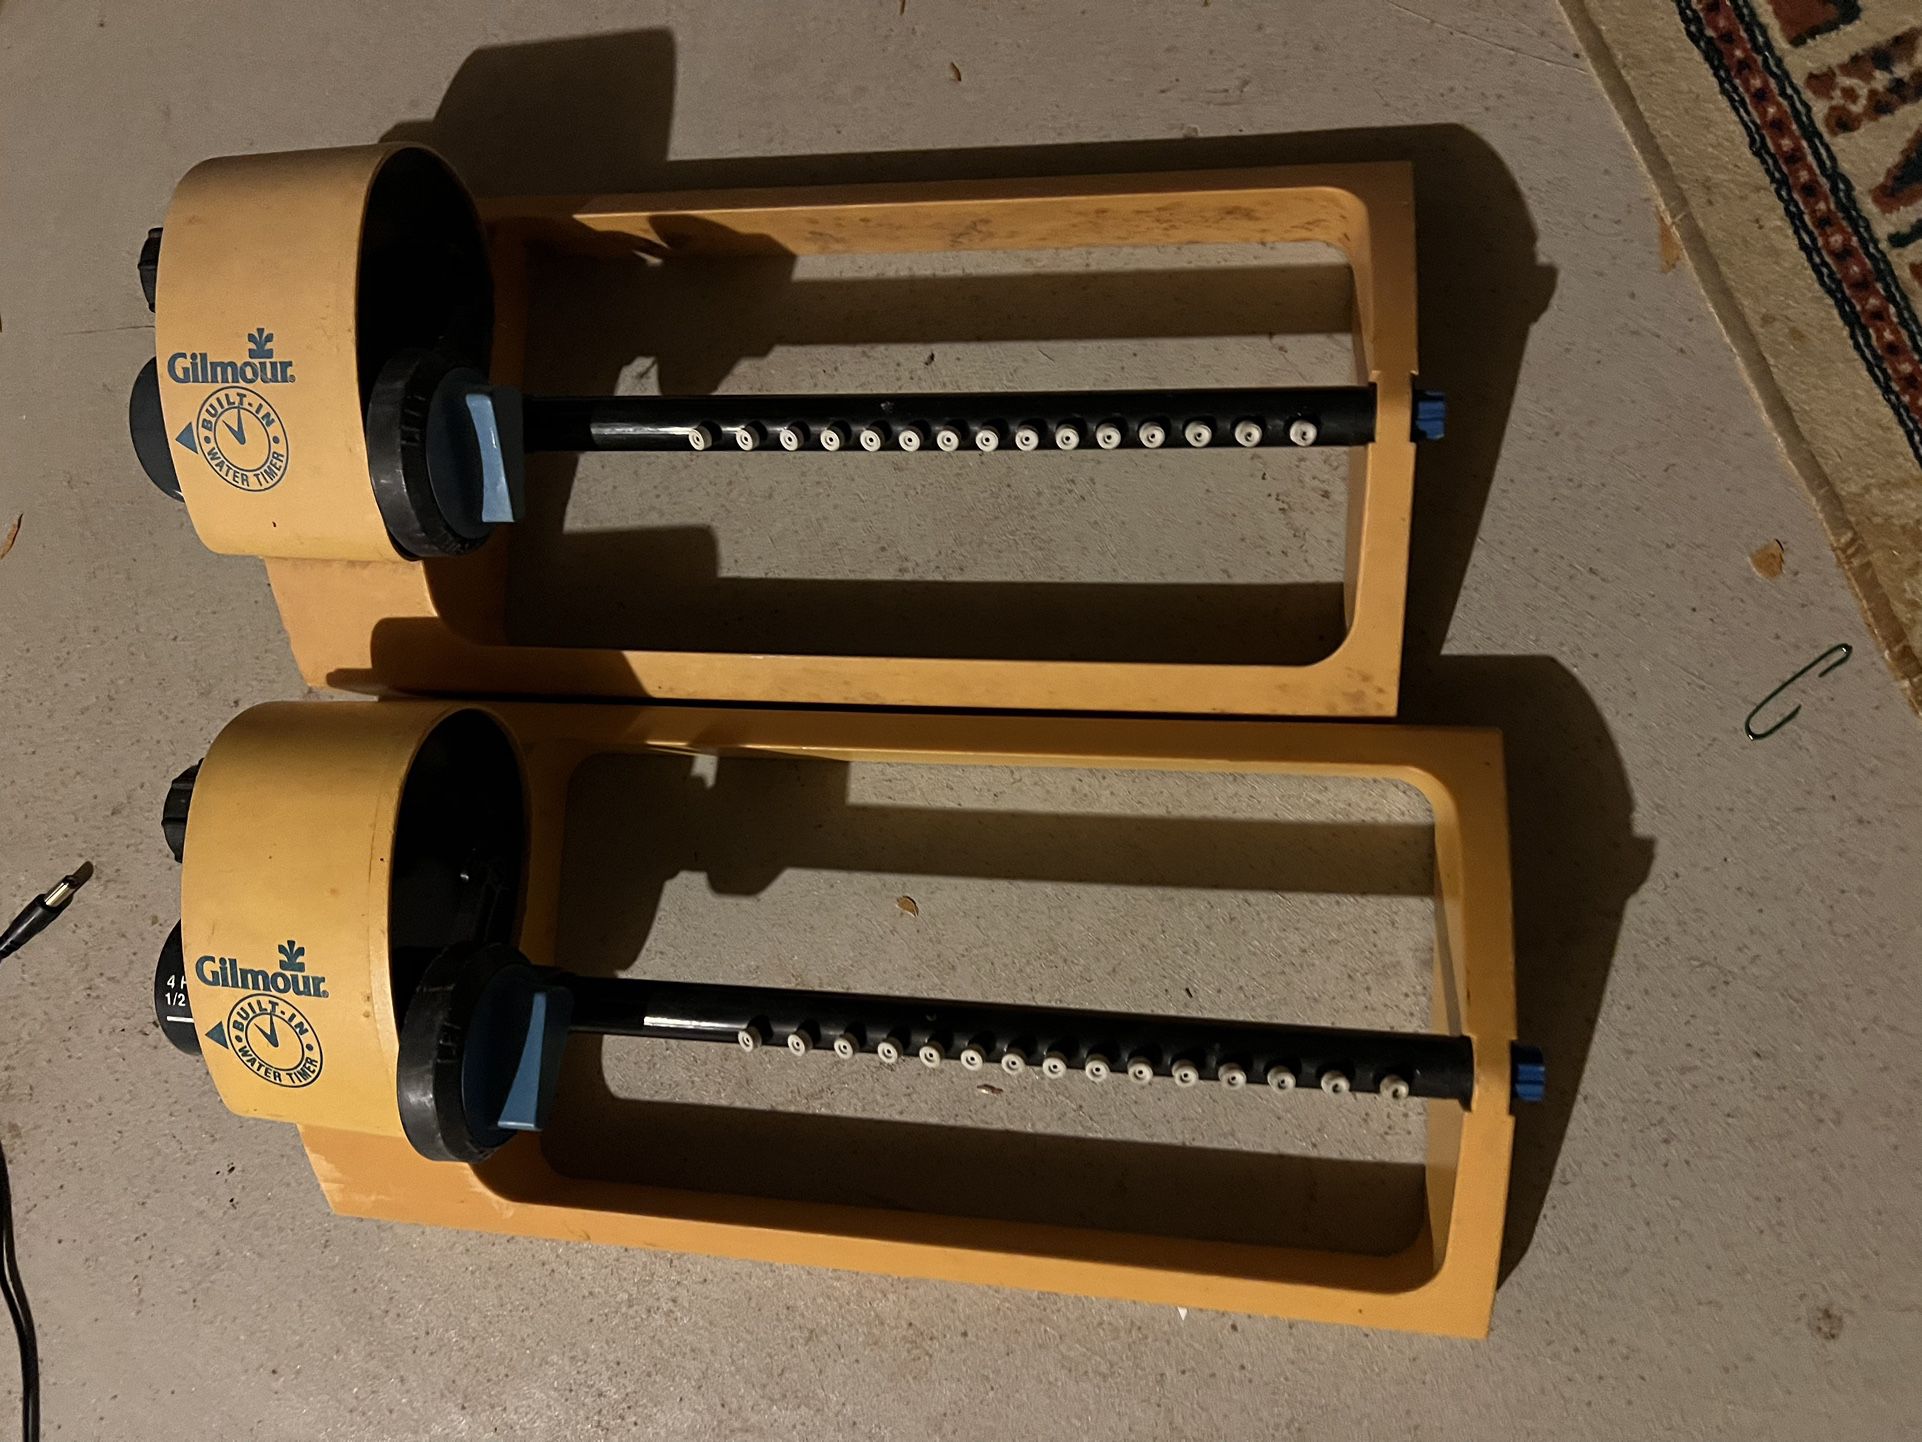 Two Sprinklers, $ 10 Each. 2 For 20